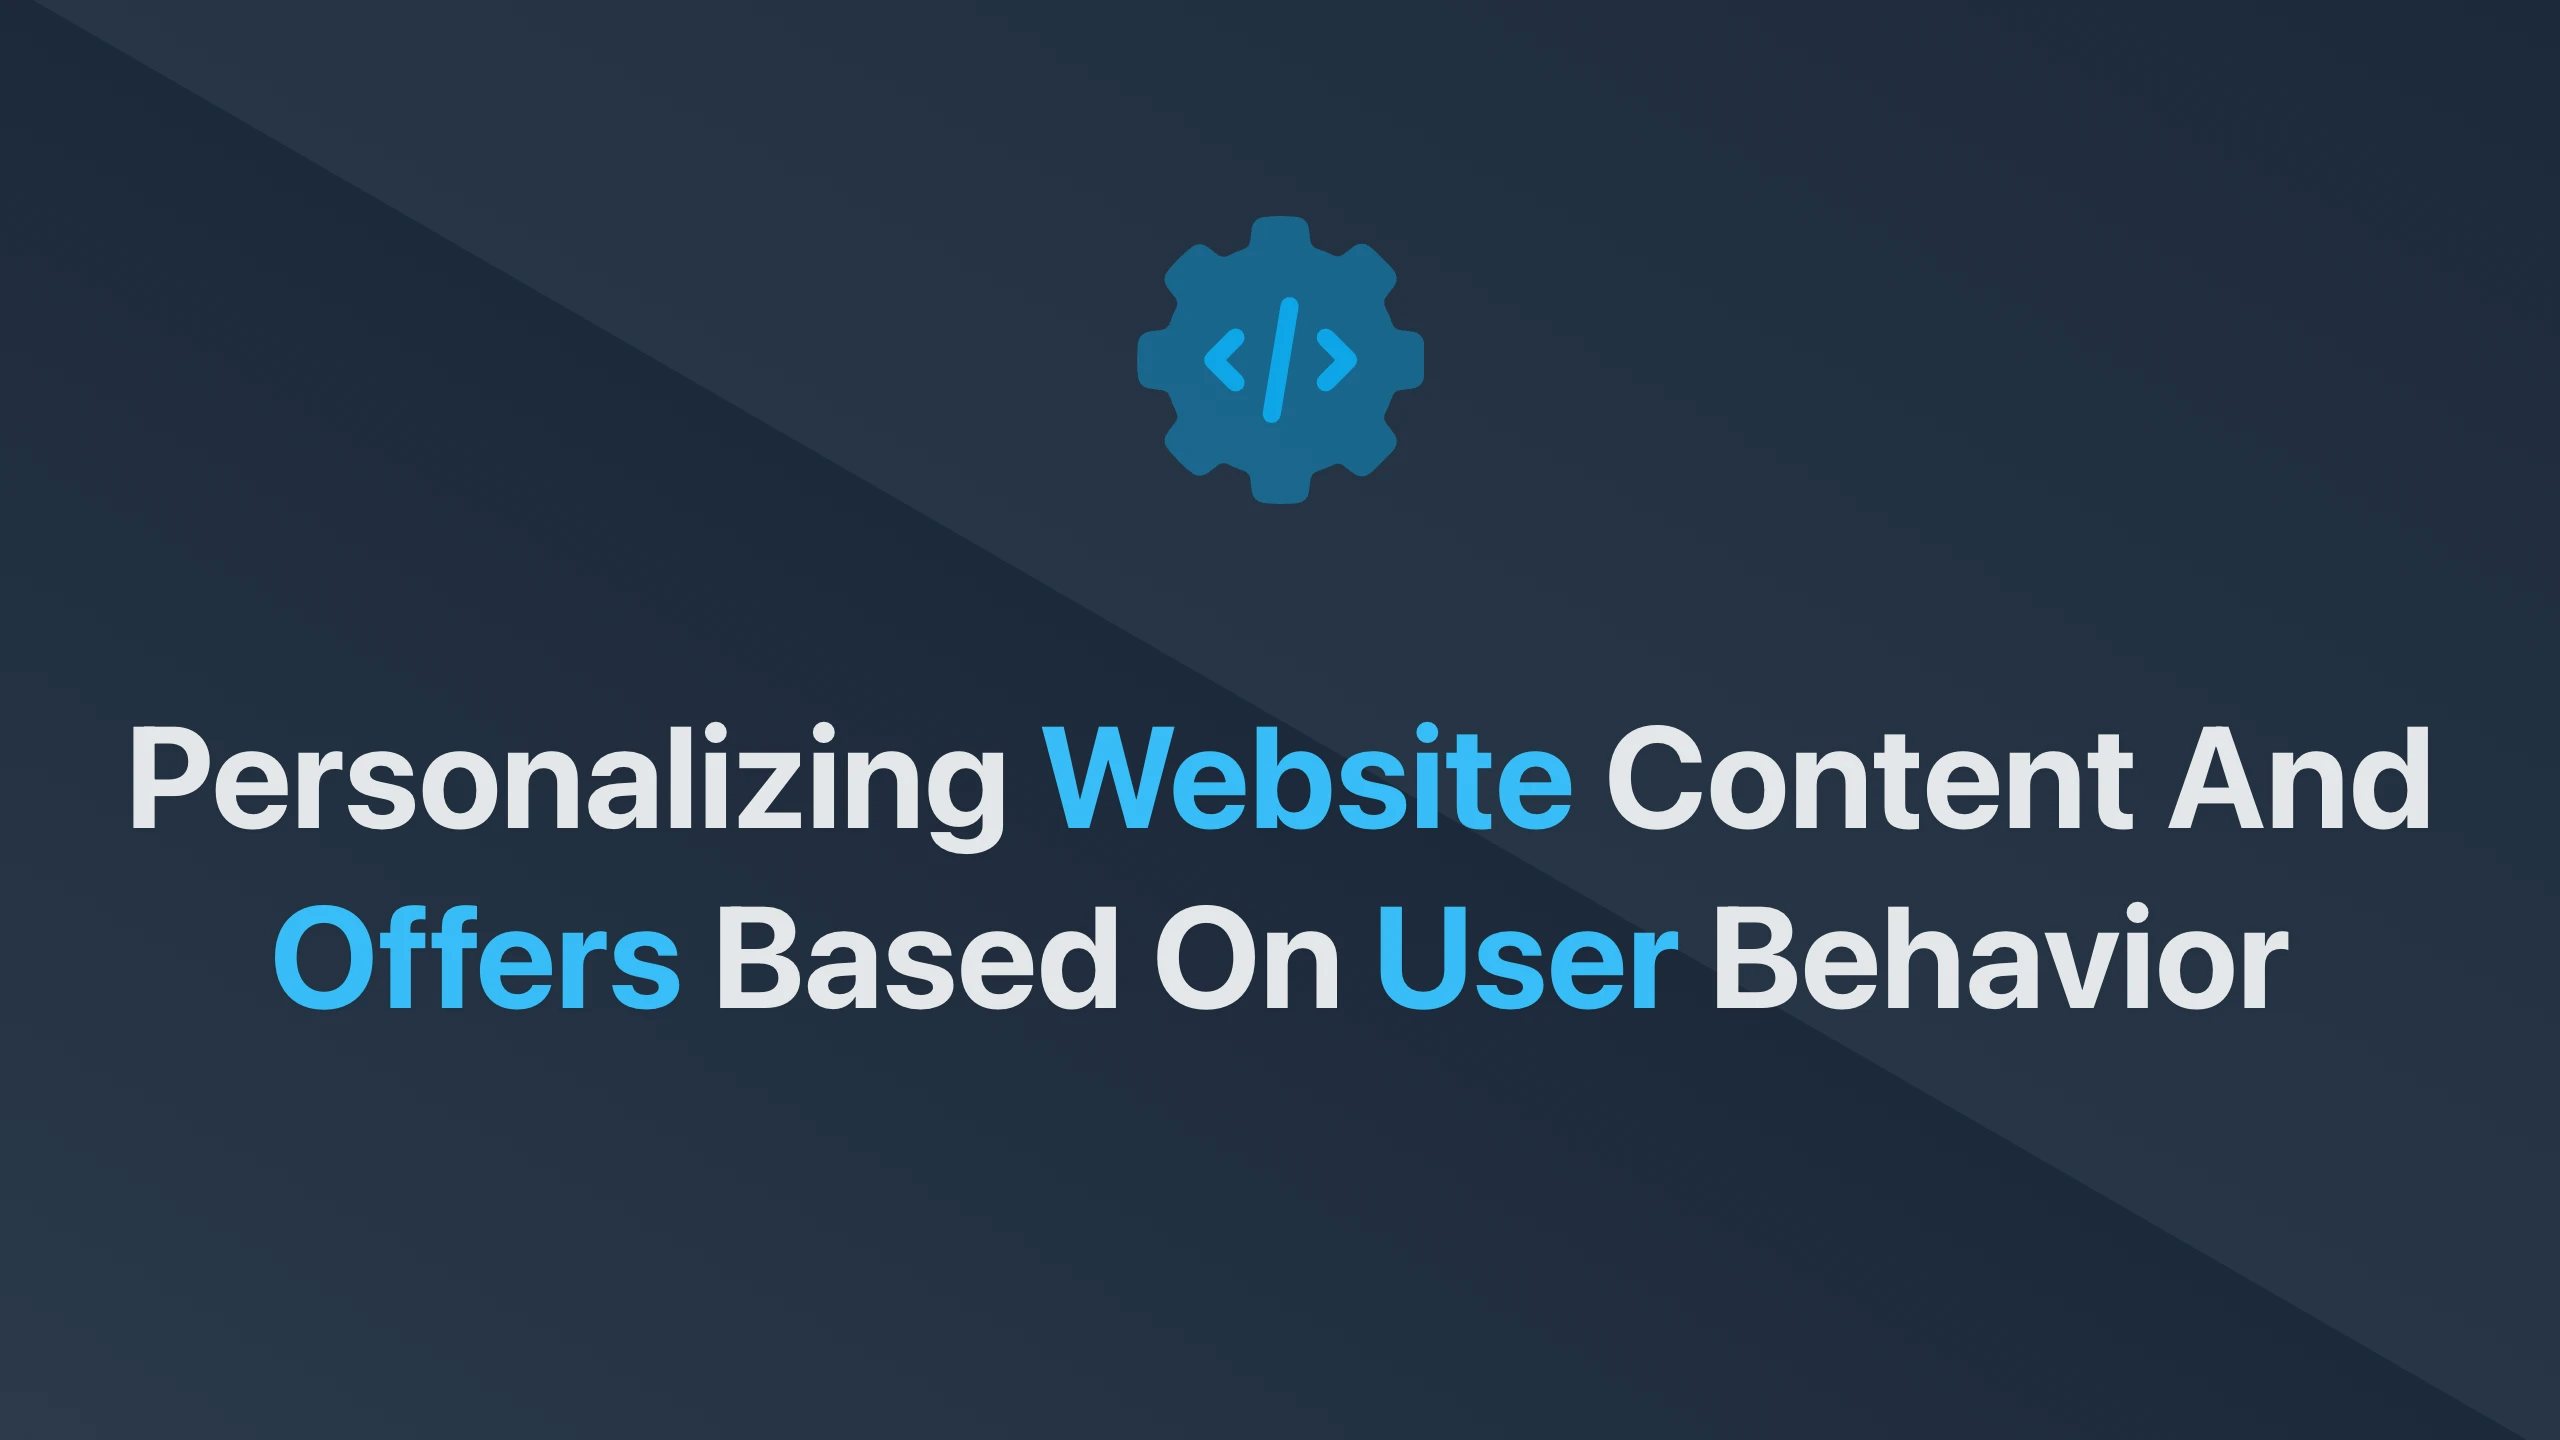 Cover Image for Personalizing Website Content and Offers Based on User Behavior